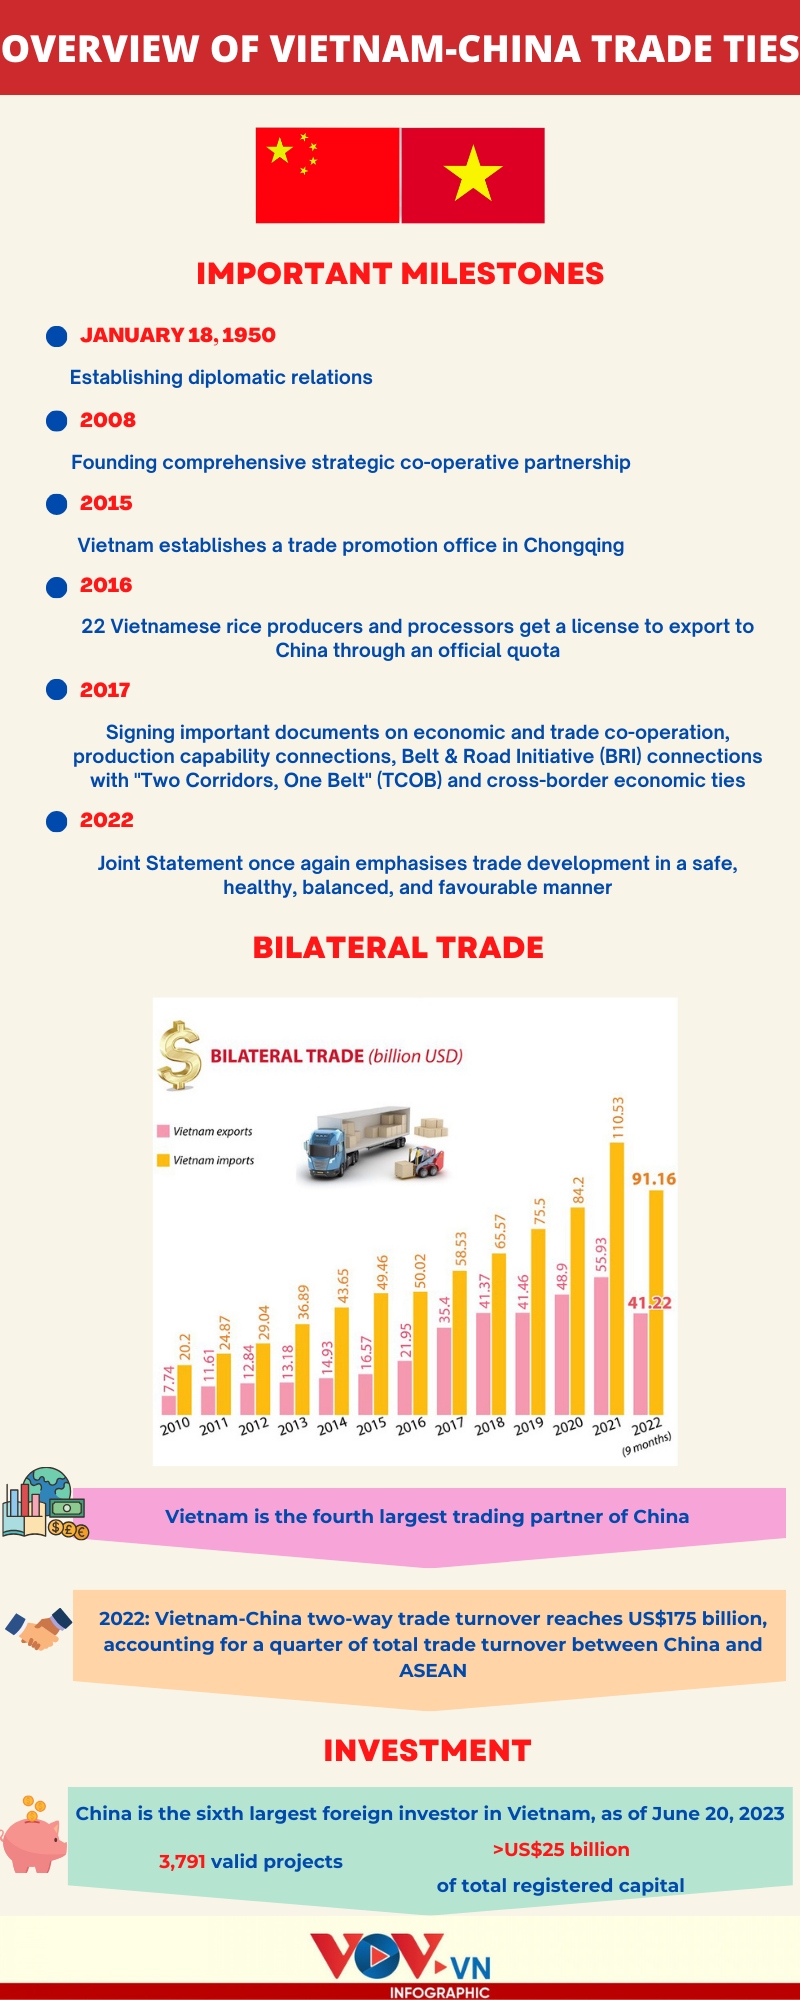 a glance at vietnam-china trade relations picture 1